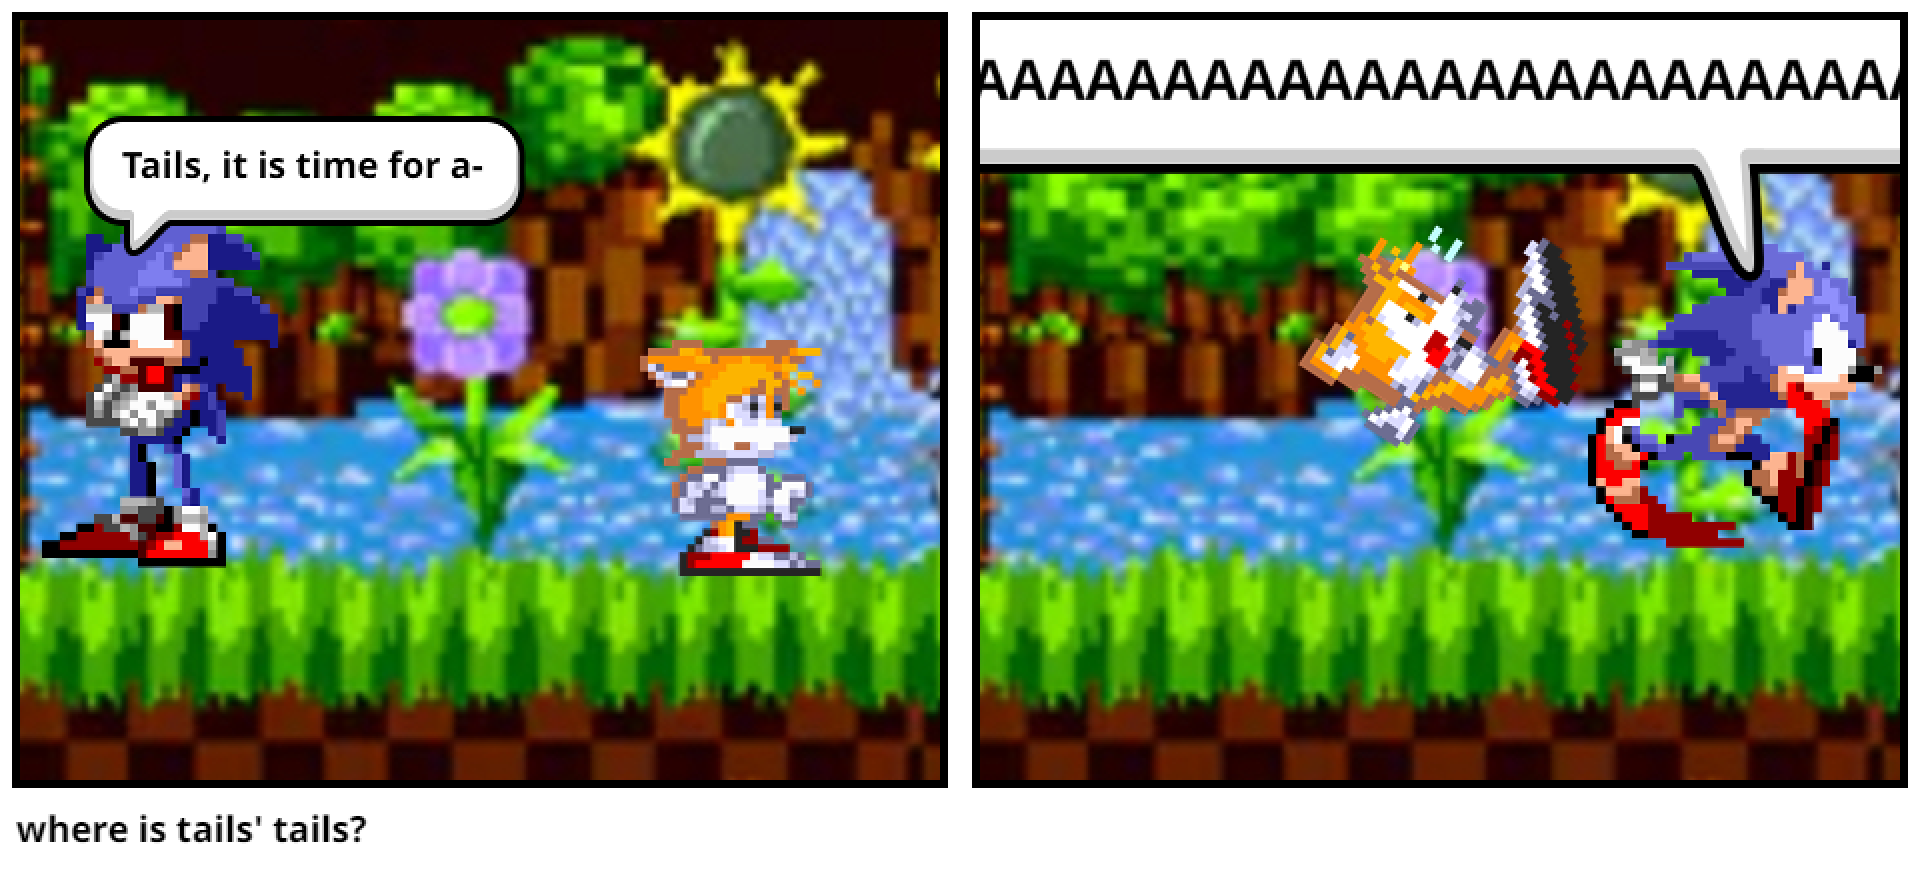 where is tails' tails?